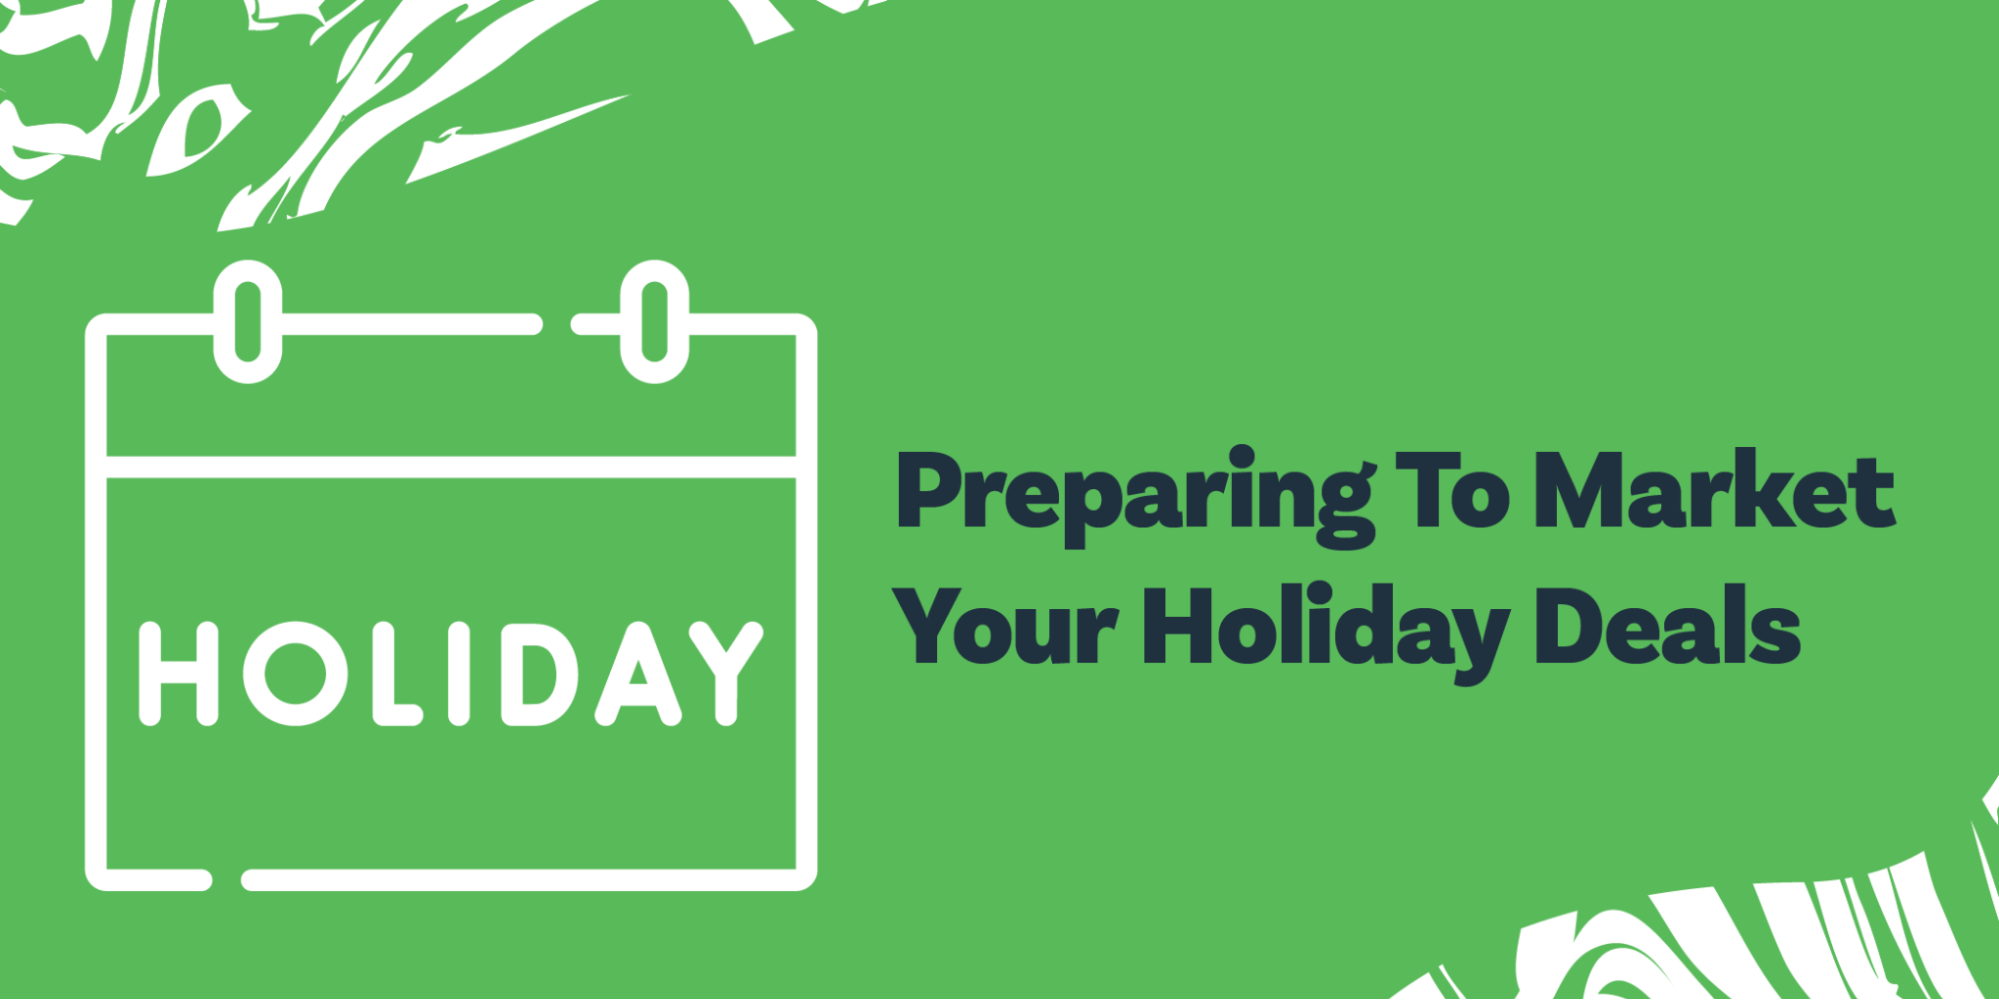 Preparing To Market Your Holiday Deals